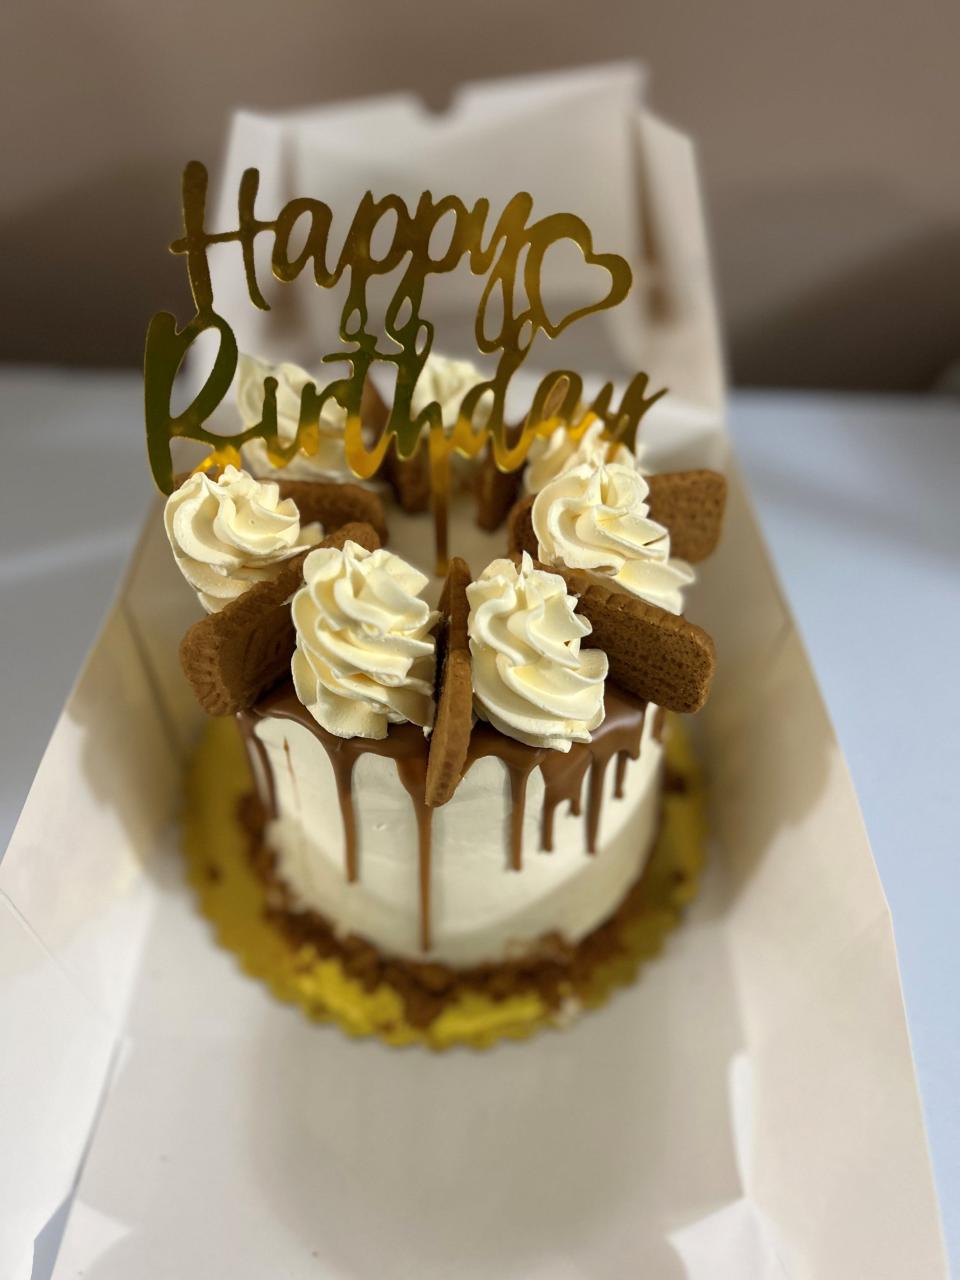 Sweet Boozy Cakes offers a variety of flavors including Cookie Butter Rumchata Cake, one of the most popular flavors. On Oct. 6, 2023, Sweet Boozy Cakes celebrated its grand opening in the business’ new permanent location in Railroad Square.